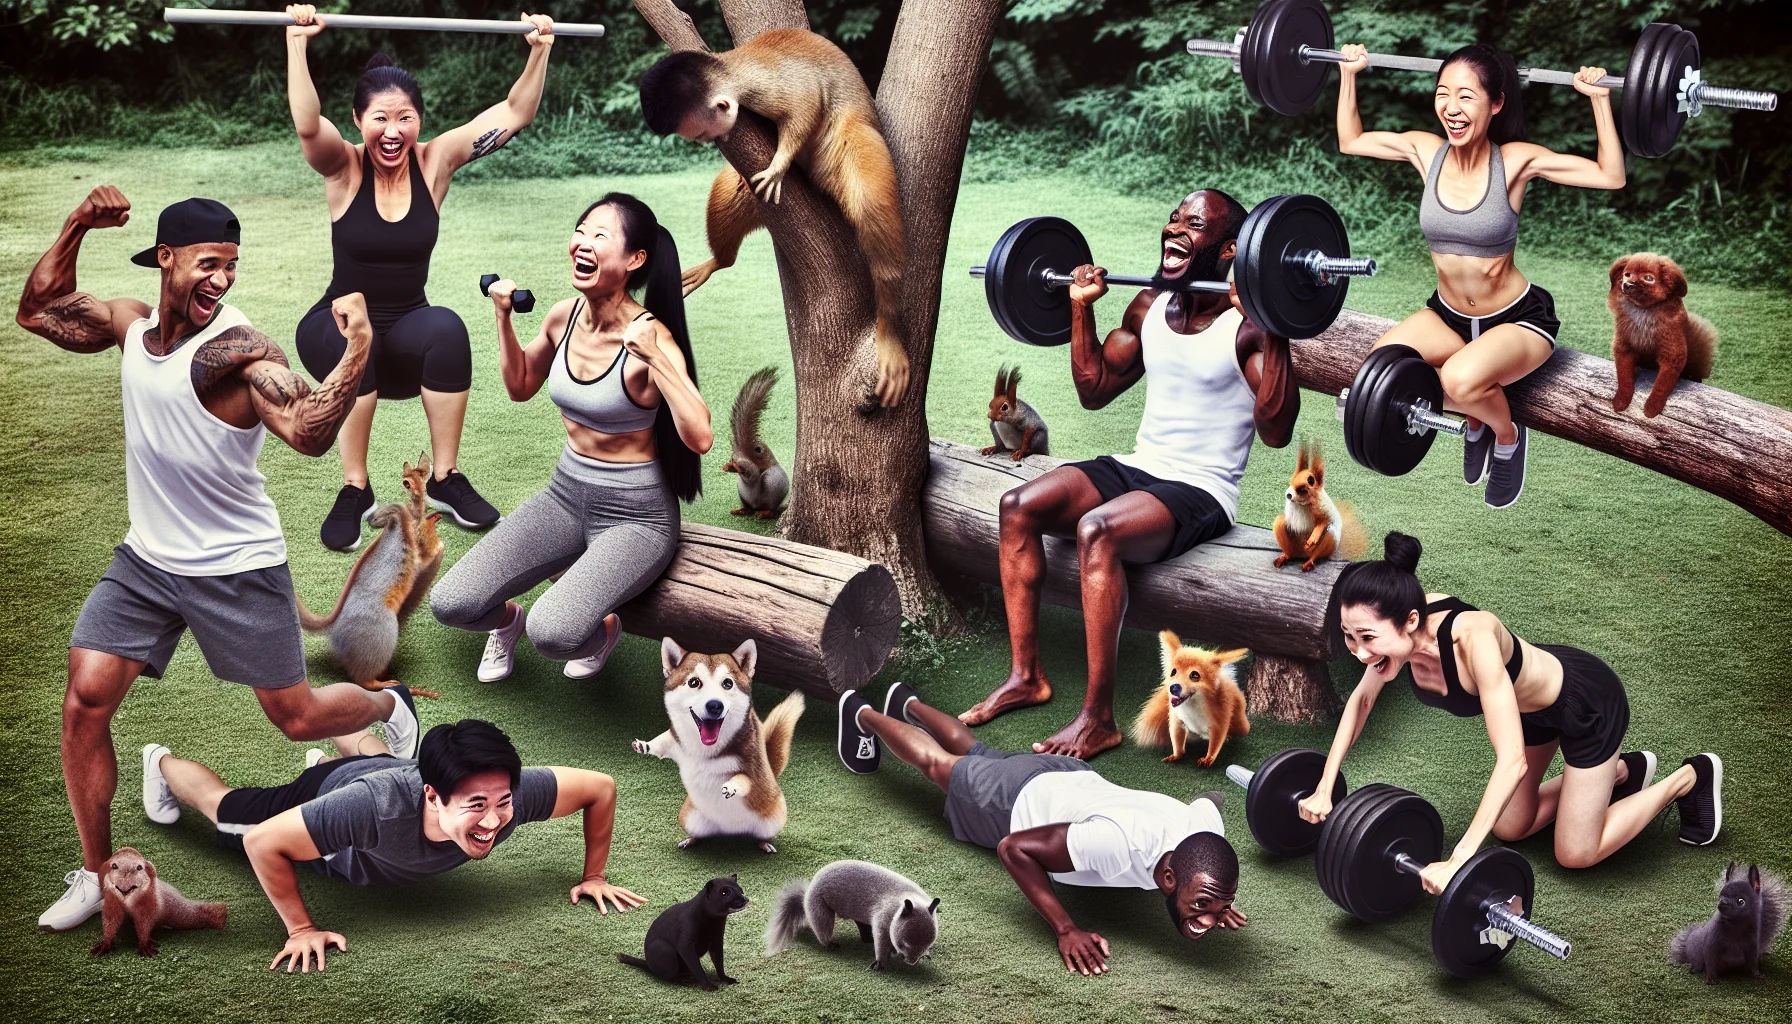 Create a humorous and motivating image of a diverse group of individuals engaging in both weightlifting and calisthenics in an unconventional setting. For example, an Asian female might be doing pull-ups on a tree branch, a Black male might be lifting heavy logs as an alternative to conventional dumbbells, a Middle-Eastern female might be doing push-ups with a squirrel cheering her on, and a White male doing squats with playful dogs around him. Display visible enjoyment on their faces, suggesting that fitness can be fun and inviting others to join in these activities.